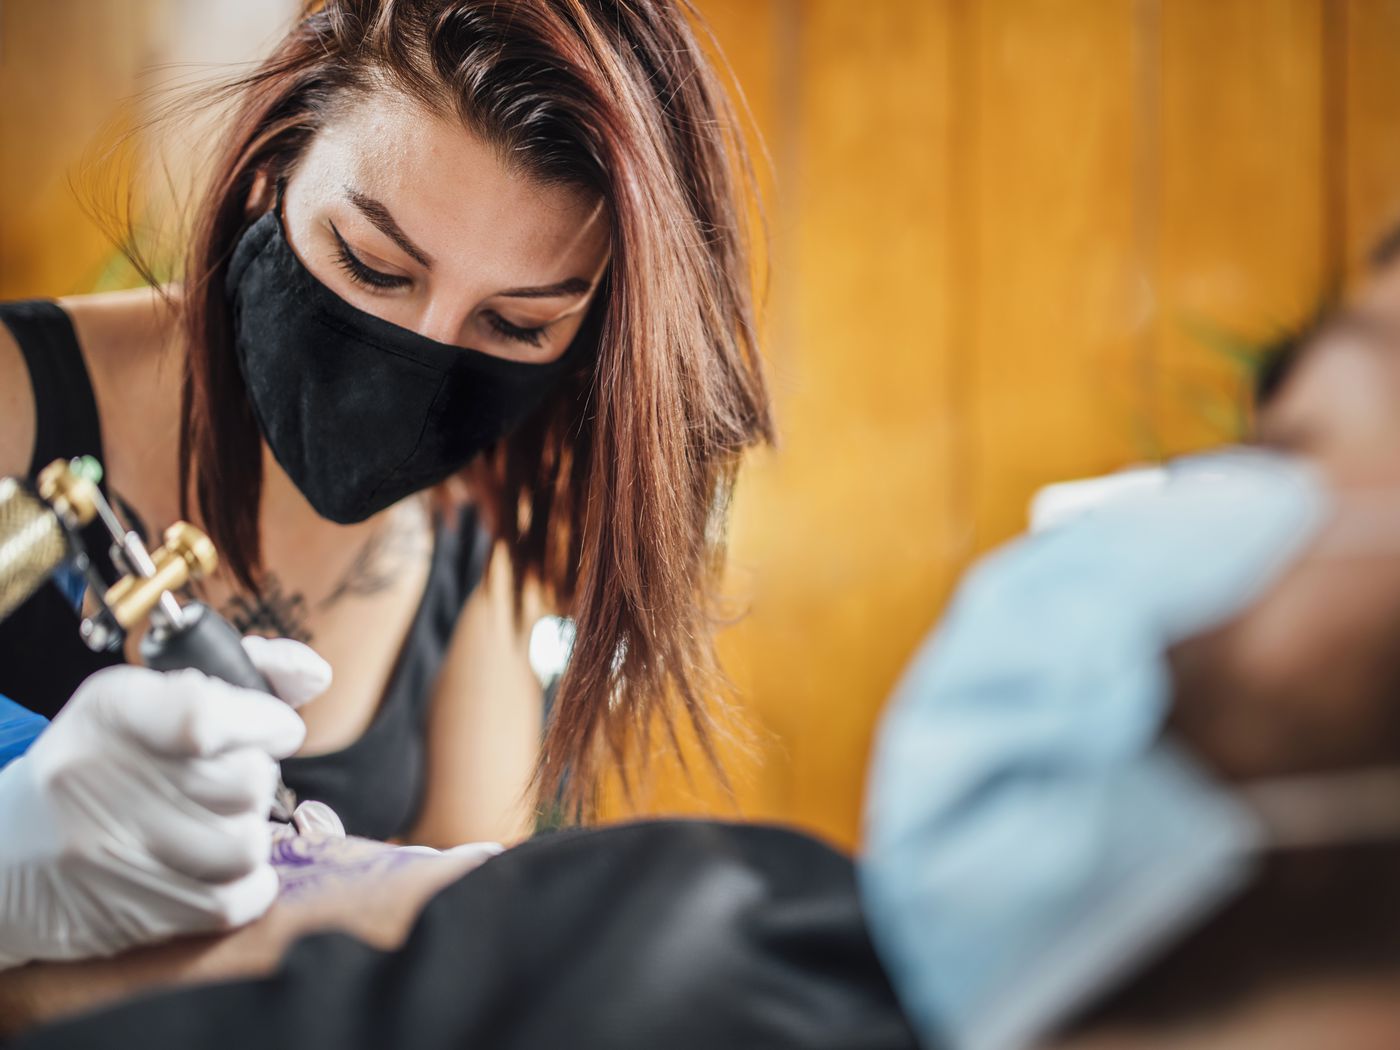 Tattoo artists are booked and busy - Vox